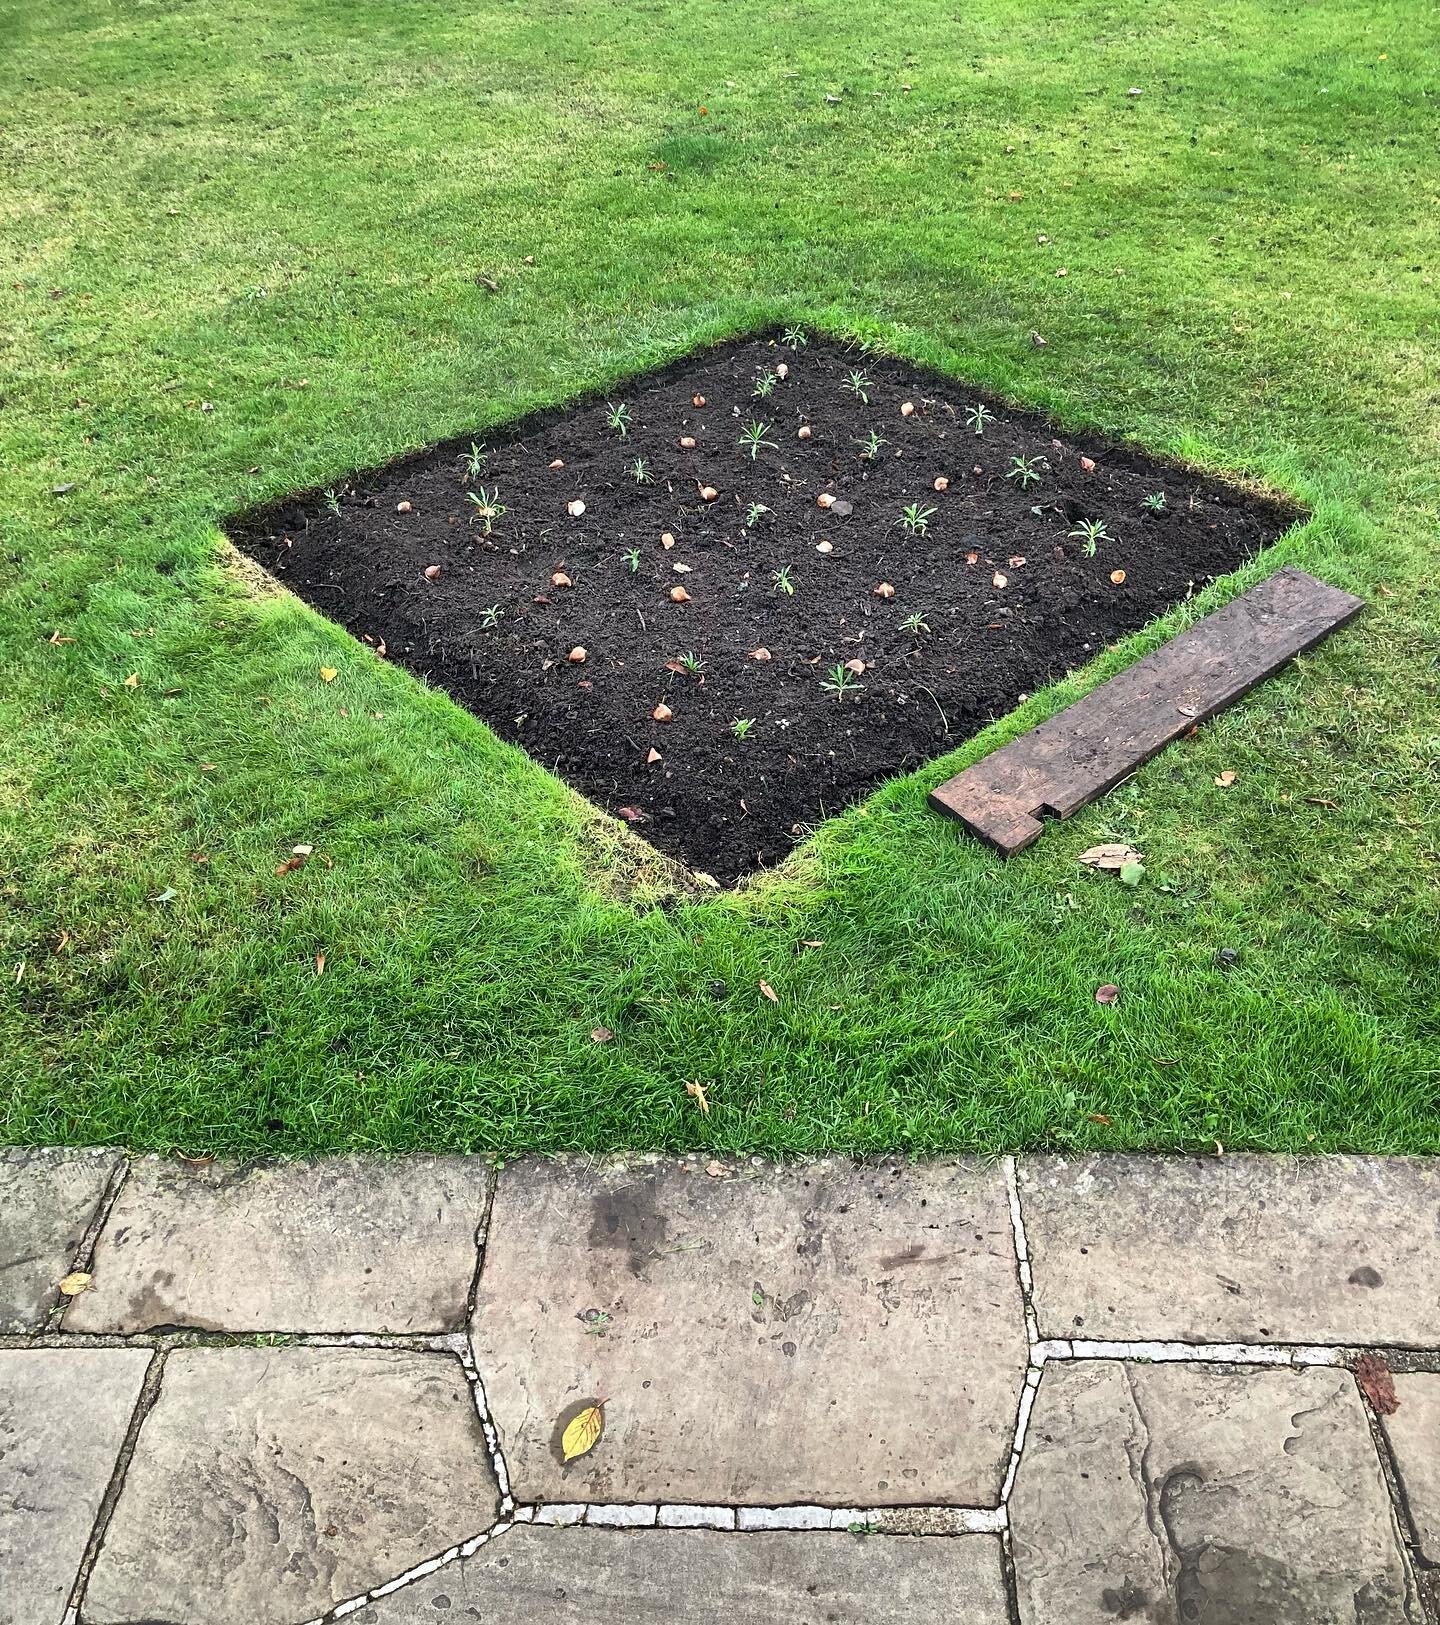 This week at Canterbury Cathedral Gardens @cburycathedral, we transplanted wallflowers (sown in February, planted out in the Deanery stock beds in May), forget-me-nots, and teasles into the Friends Garden, Memorial Garden, and some of the Precinct be